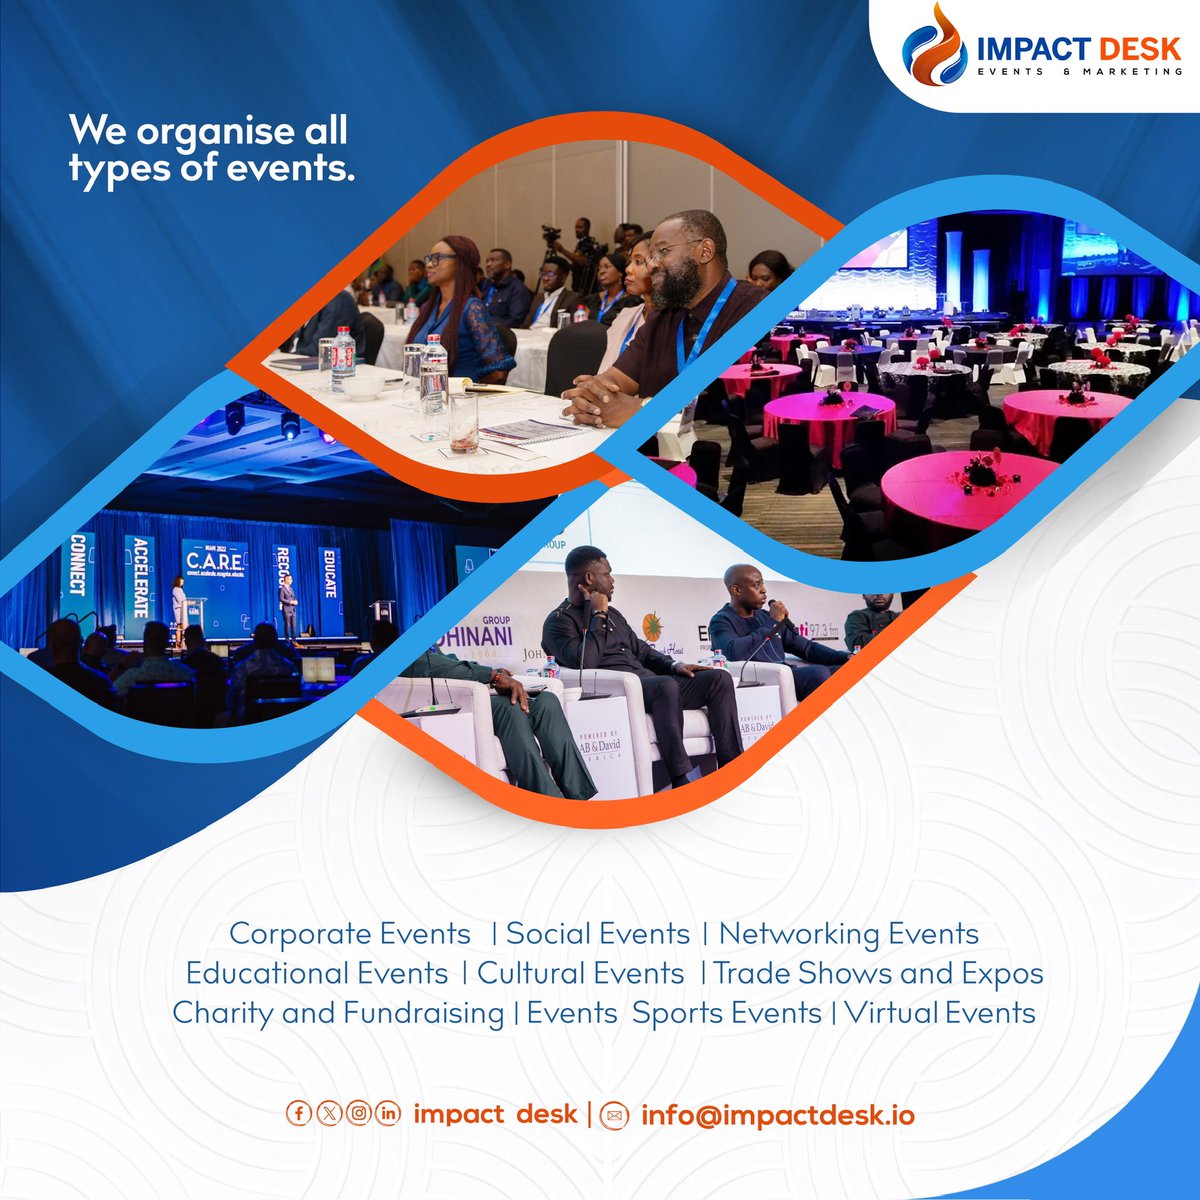 Let us redefine your event experiences. Contact us on 0540 909 068 for all types of event. 

#eventplanner #events #impactdesk #ElevateYourBrand